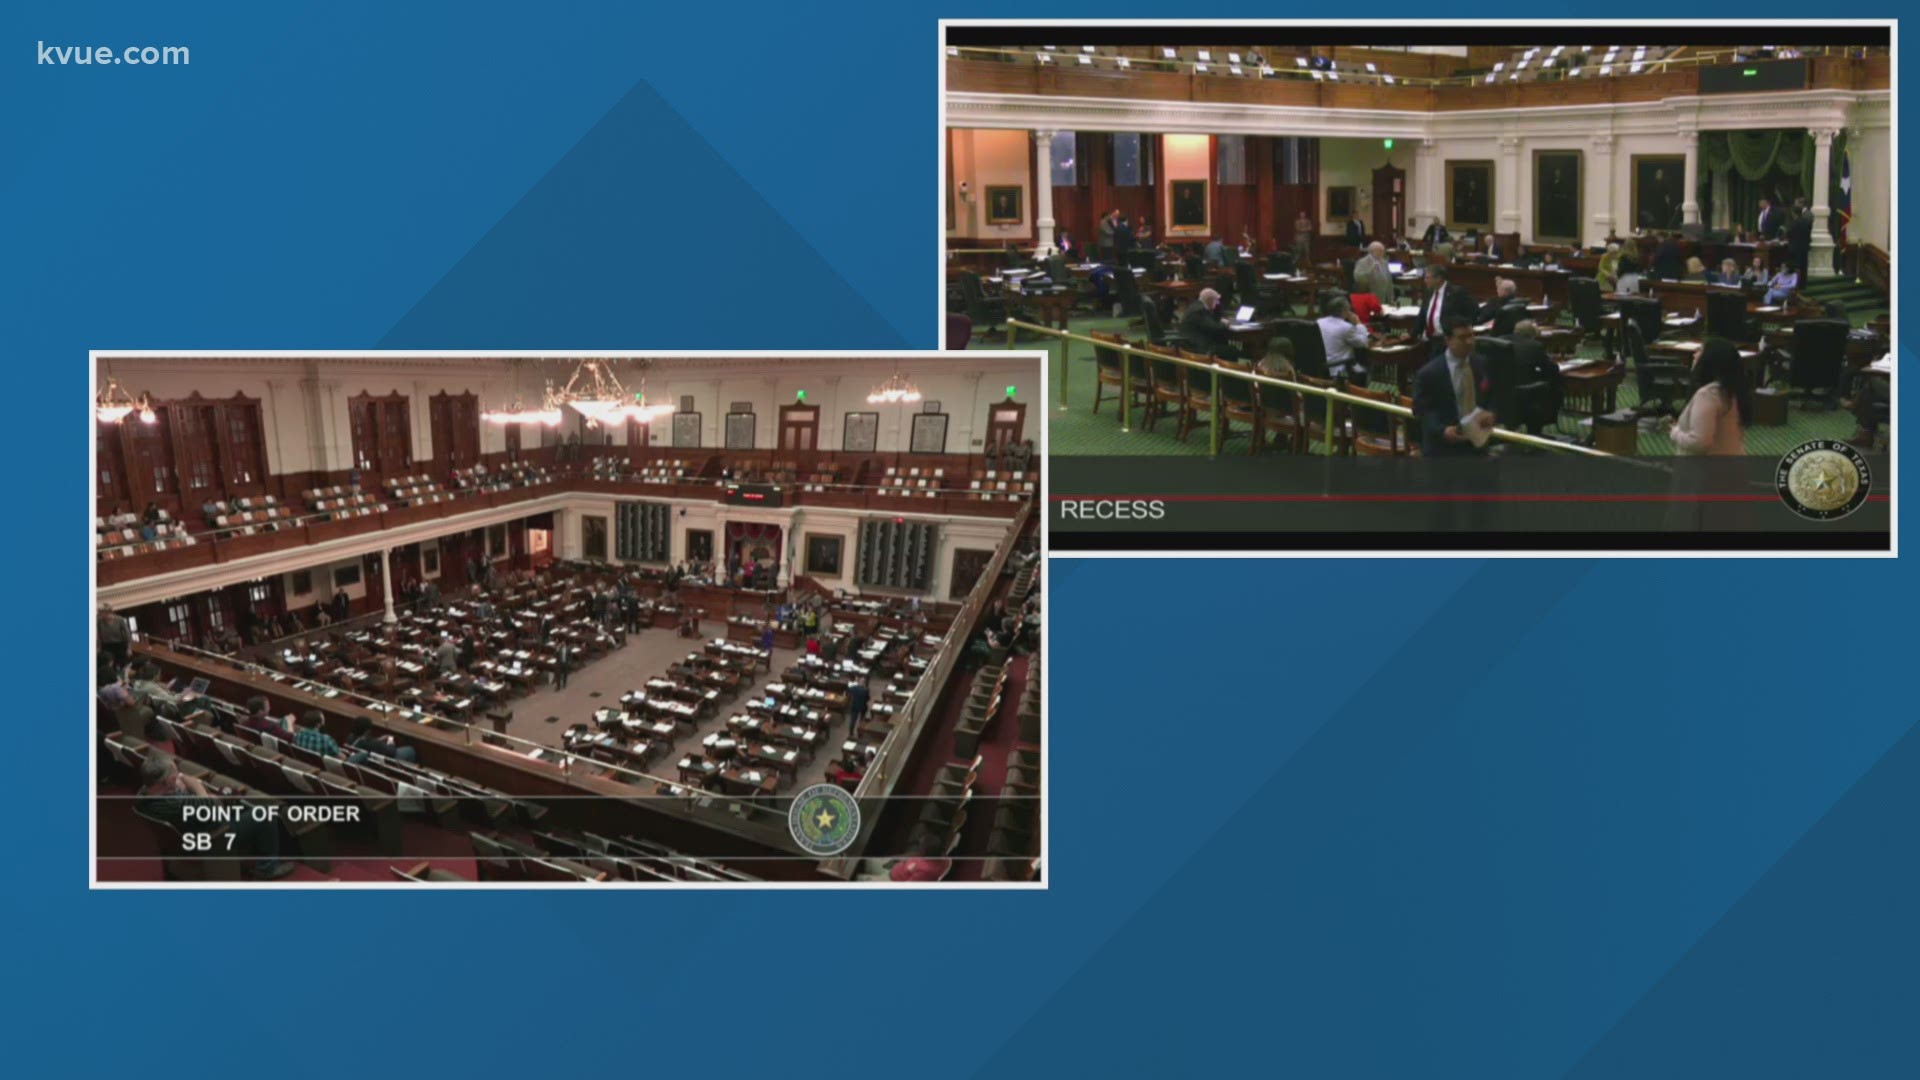 Just hours before the 2021 legislative session is officially over, the Texas House starts debating the controversial Senate Bill 7.